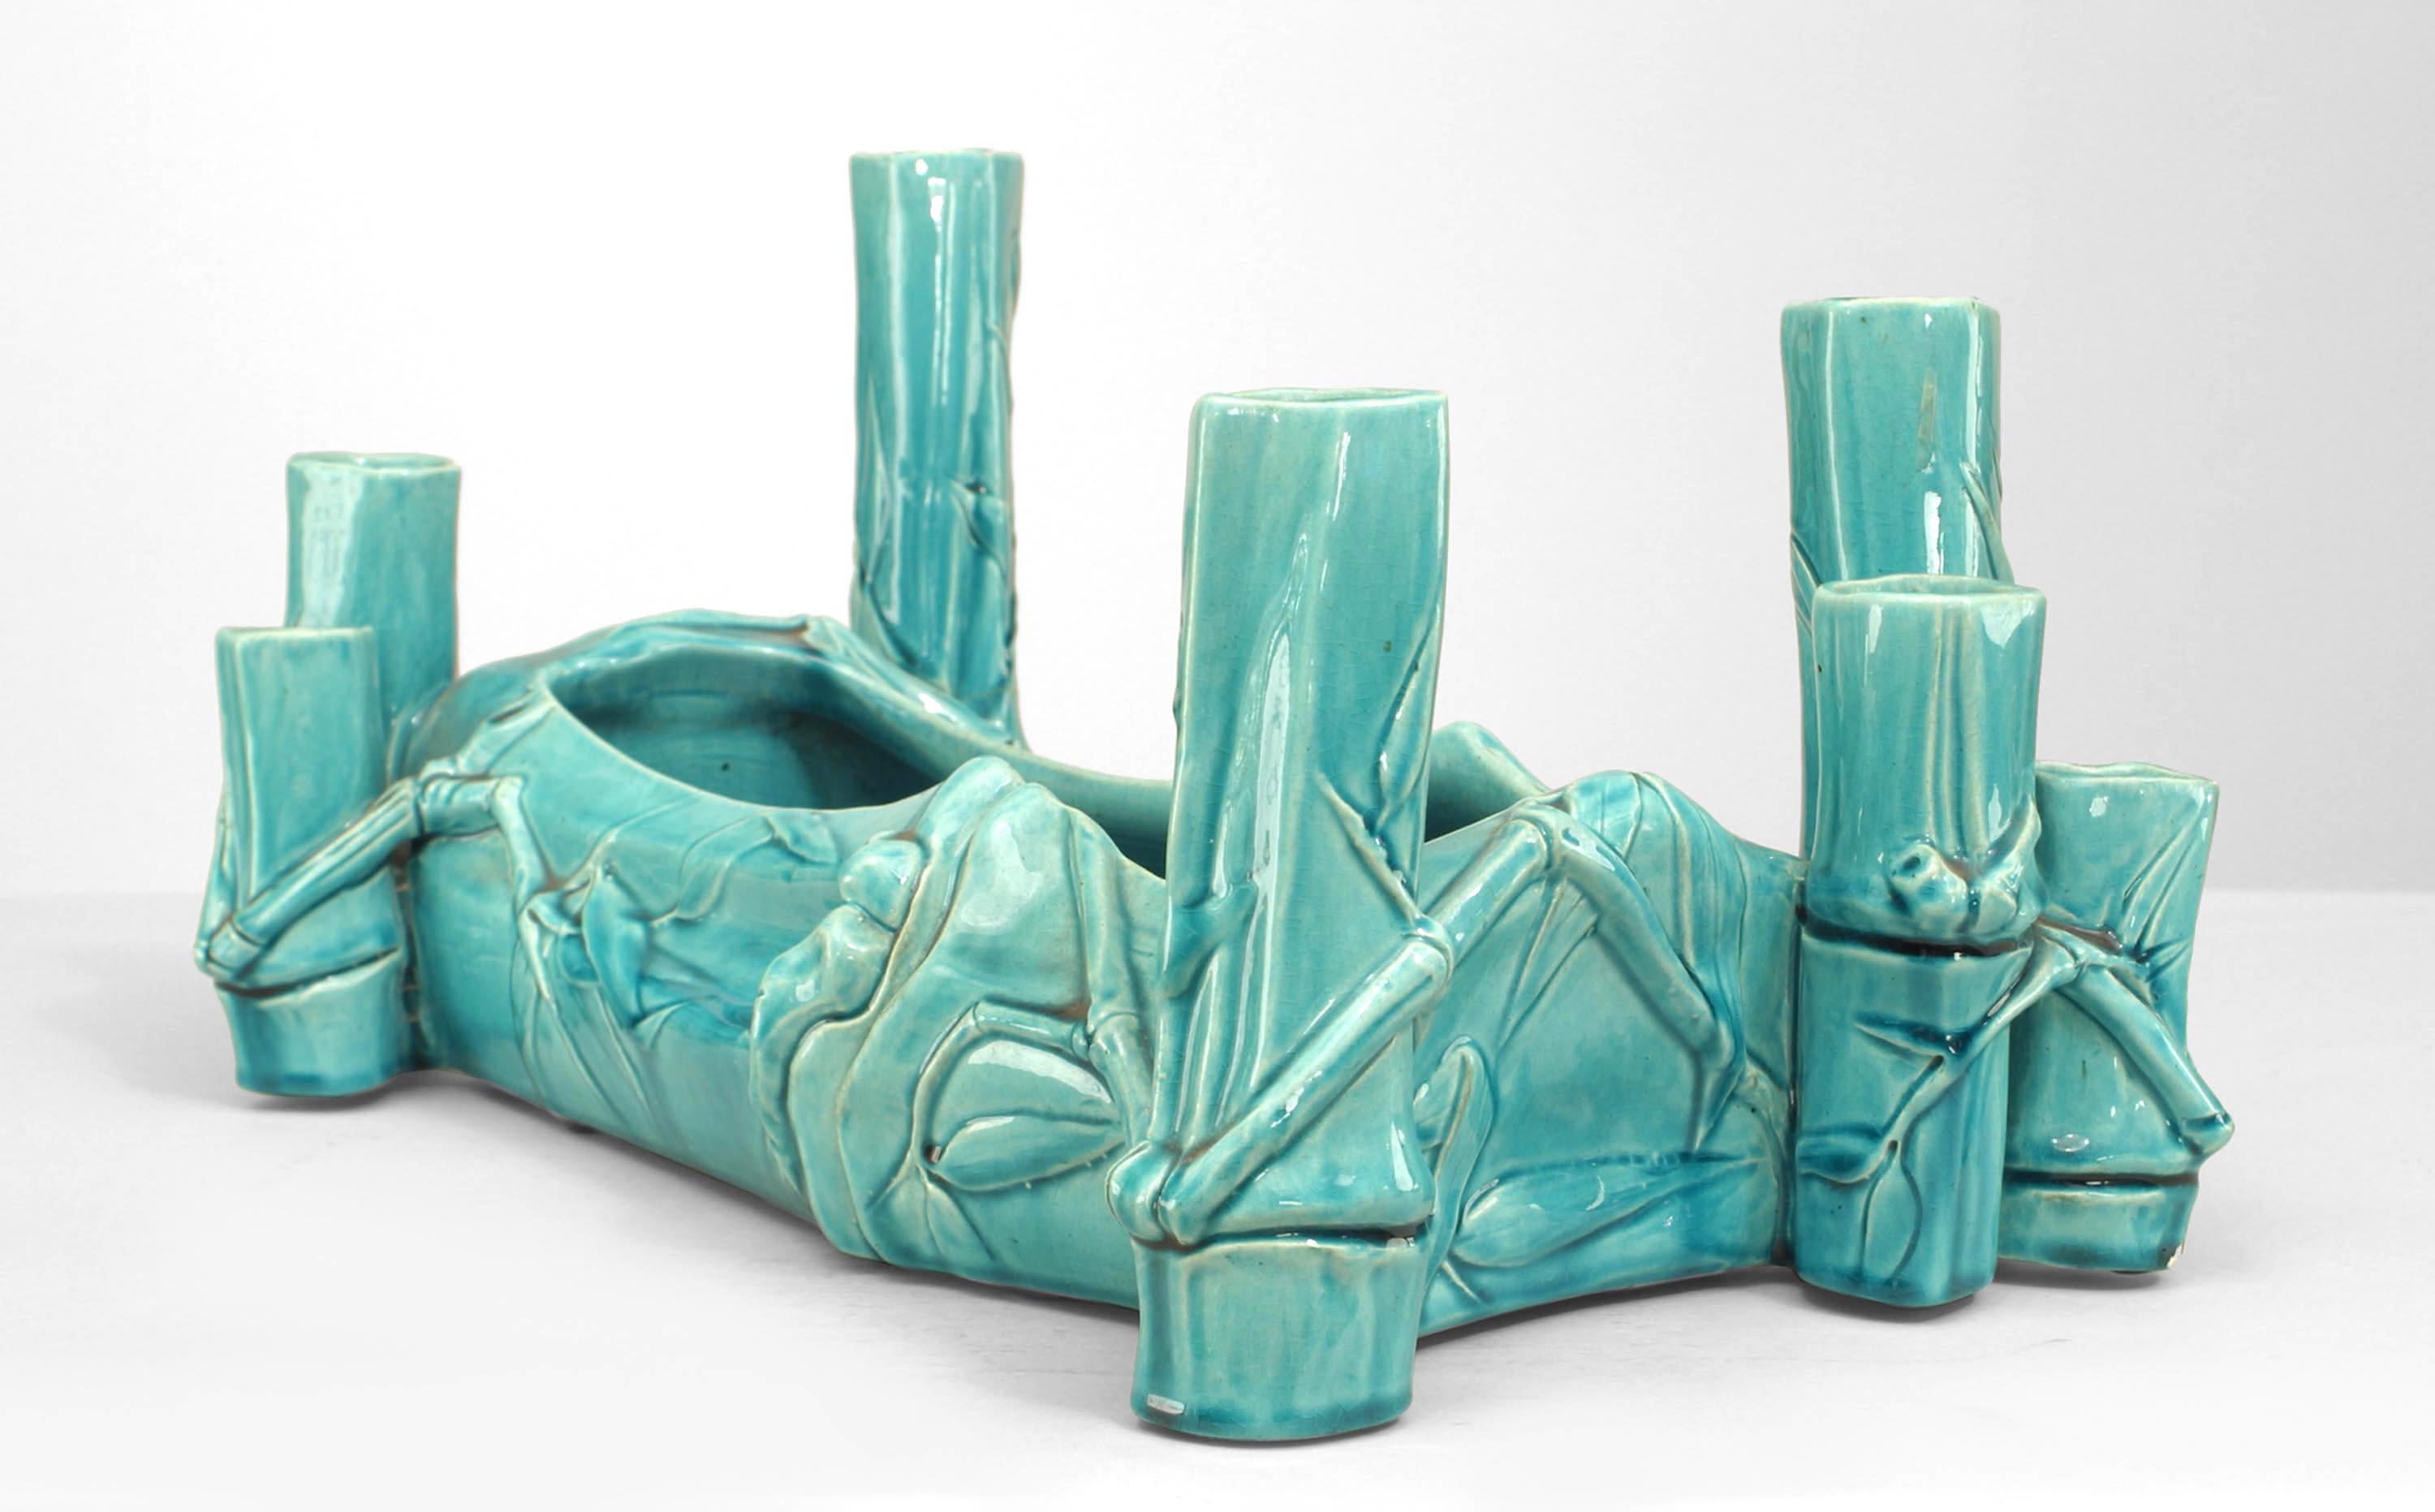 English Victorian turquoise porcelain rectangular shaped centerpiece with a bamboo design and 2 tier bud vase corners.
